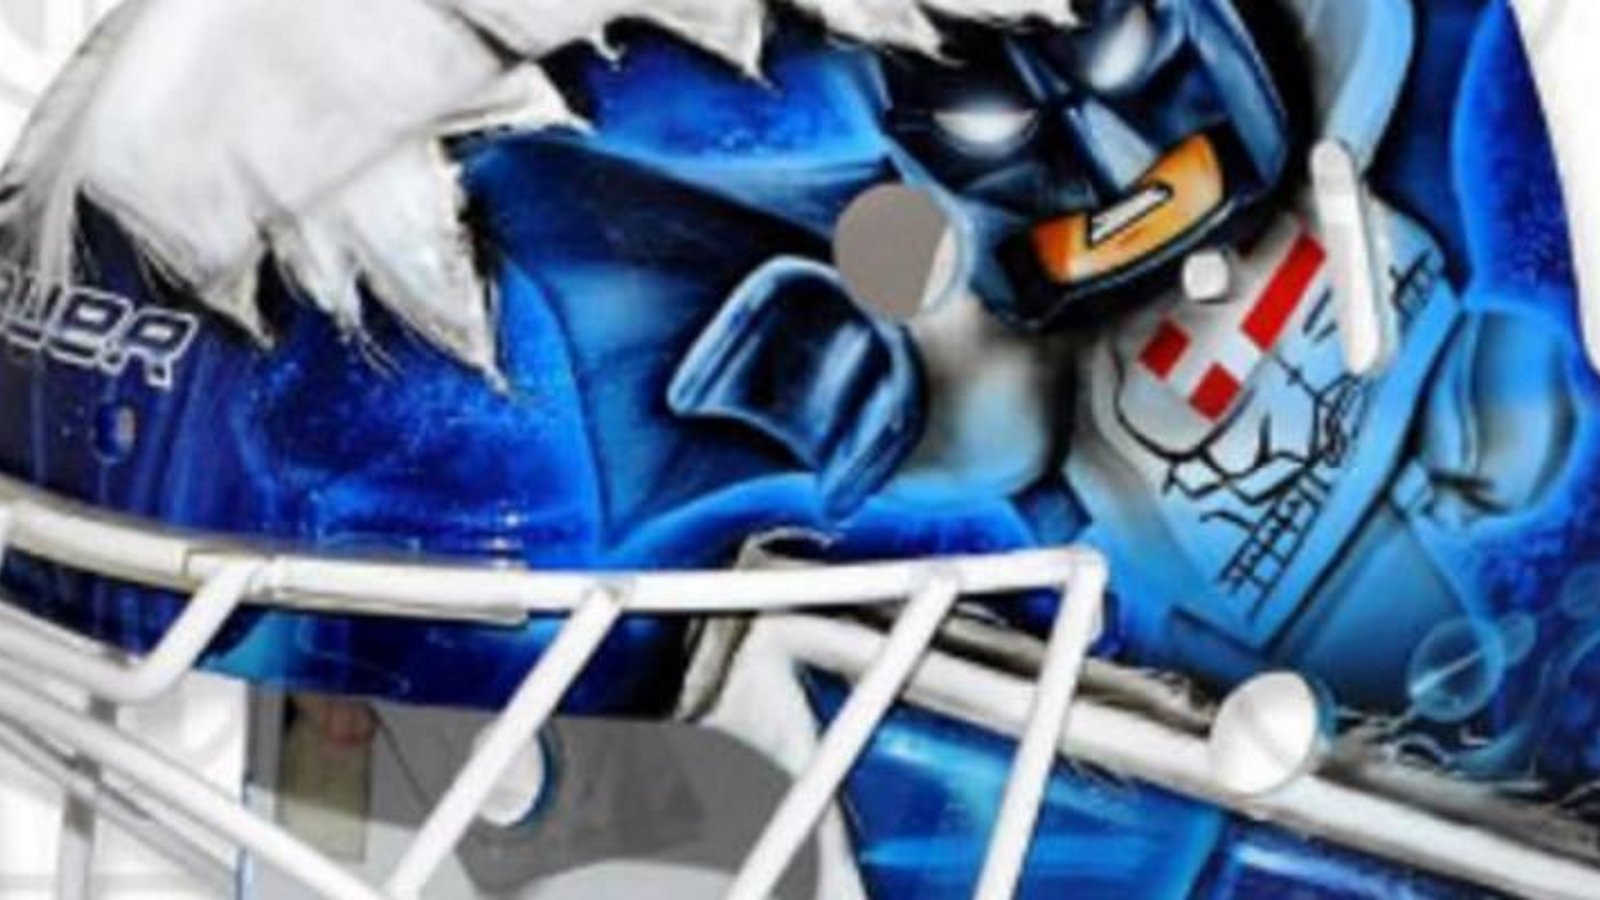 Frederik Andersen's World Cup mask will showcase his new team.